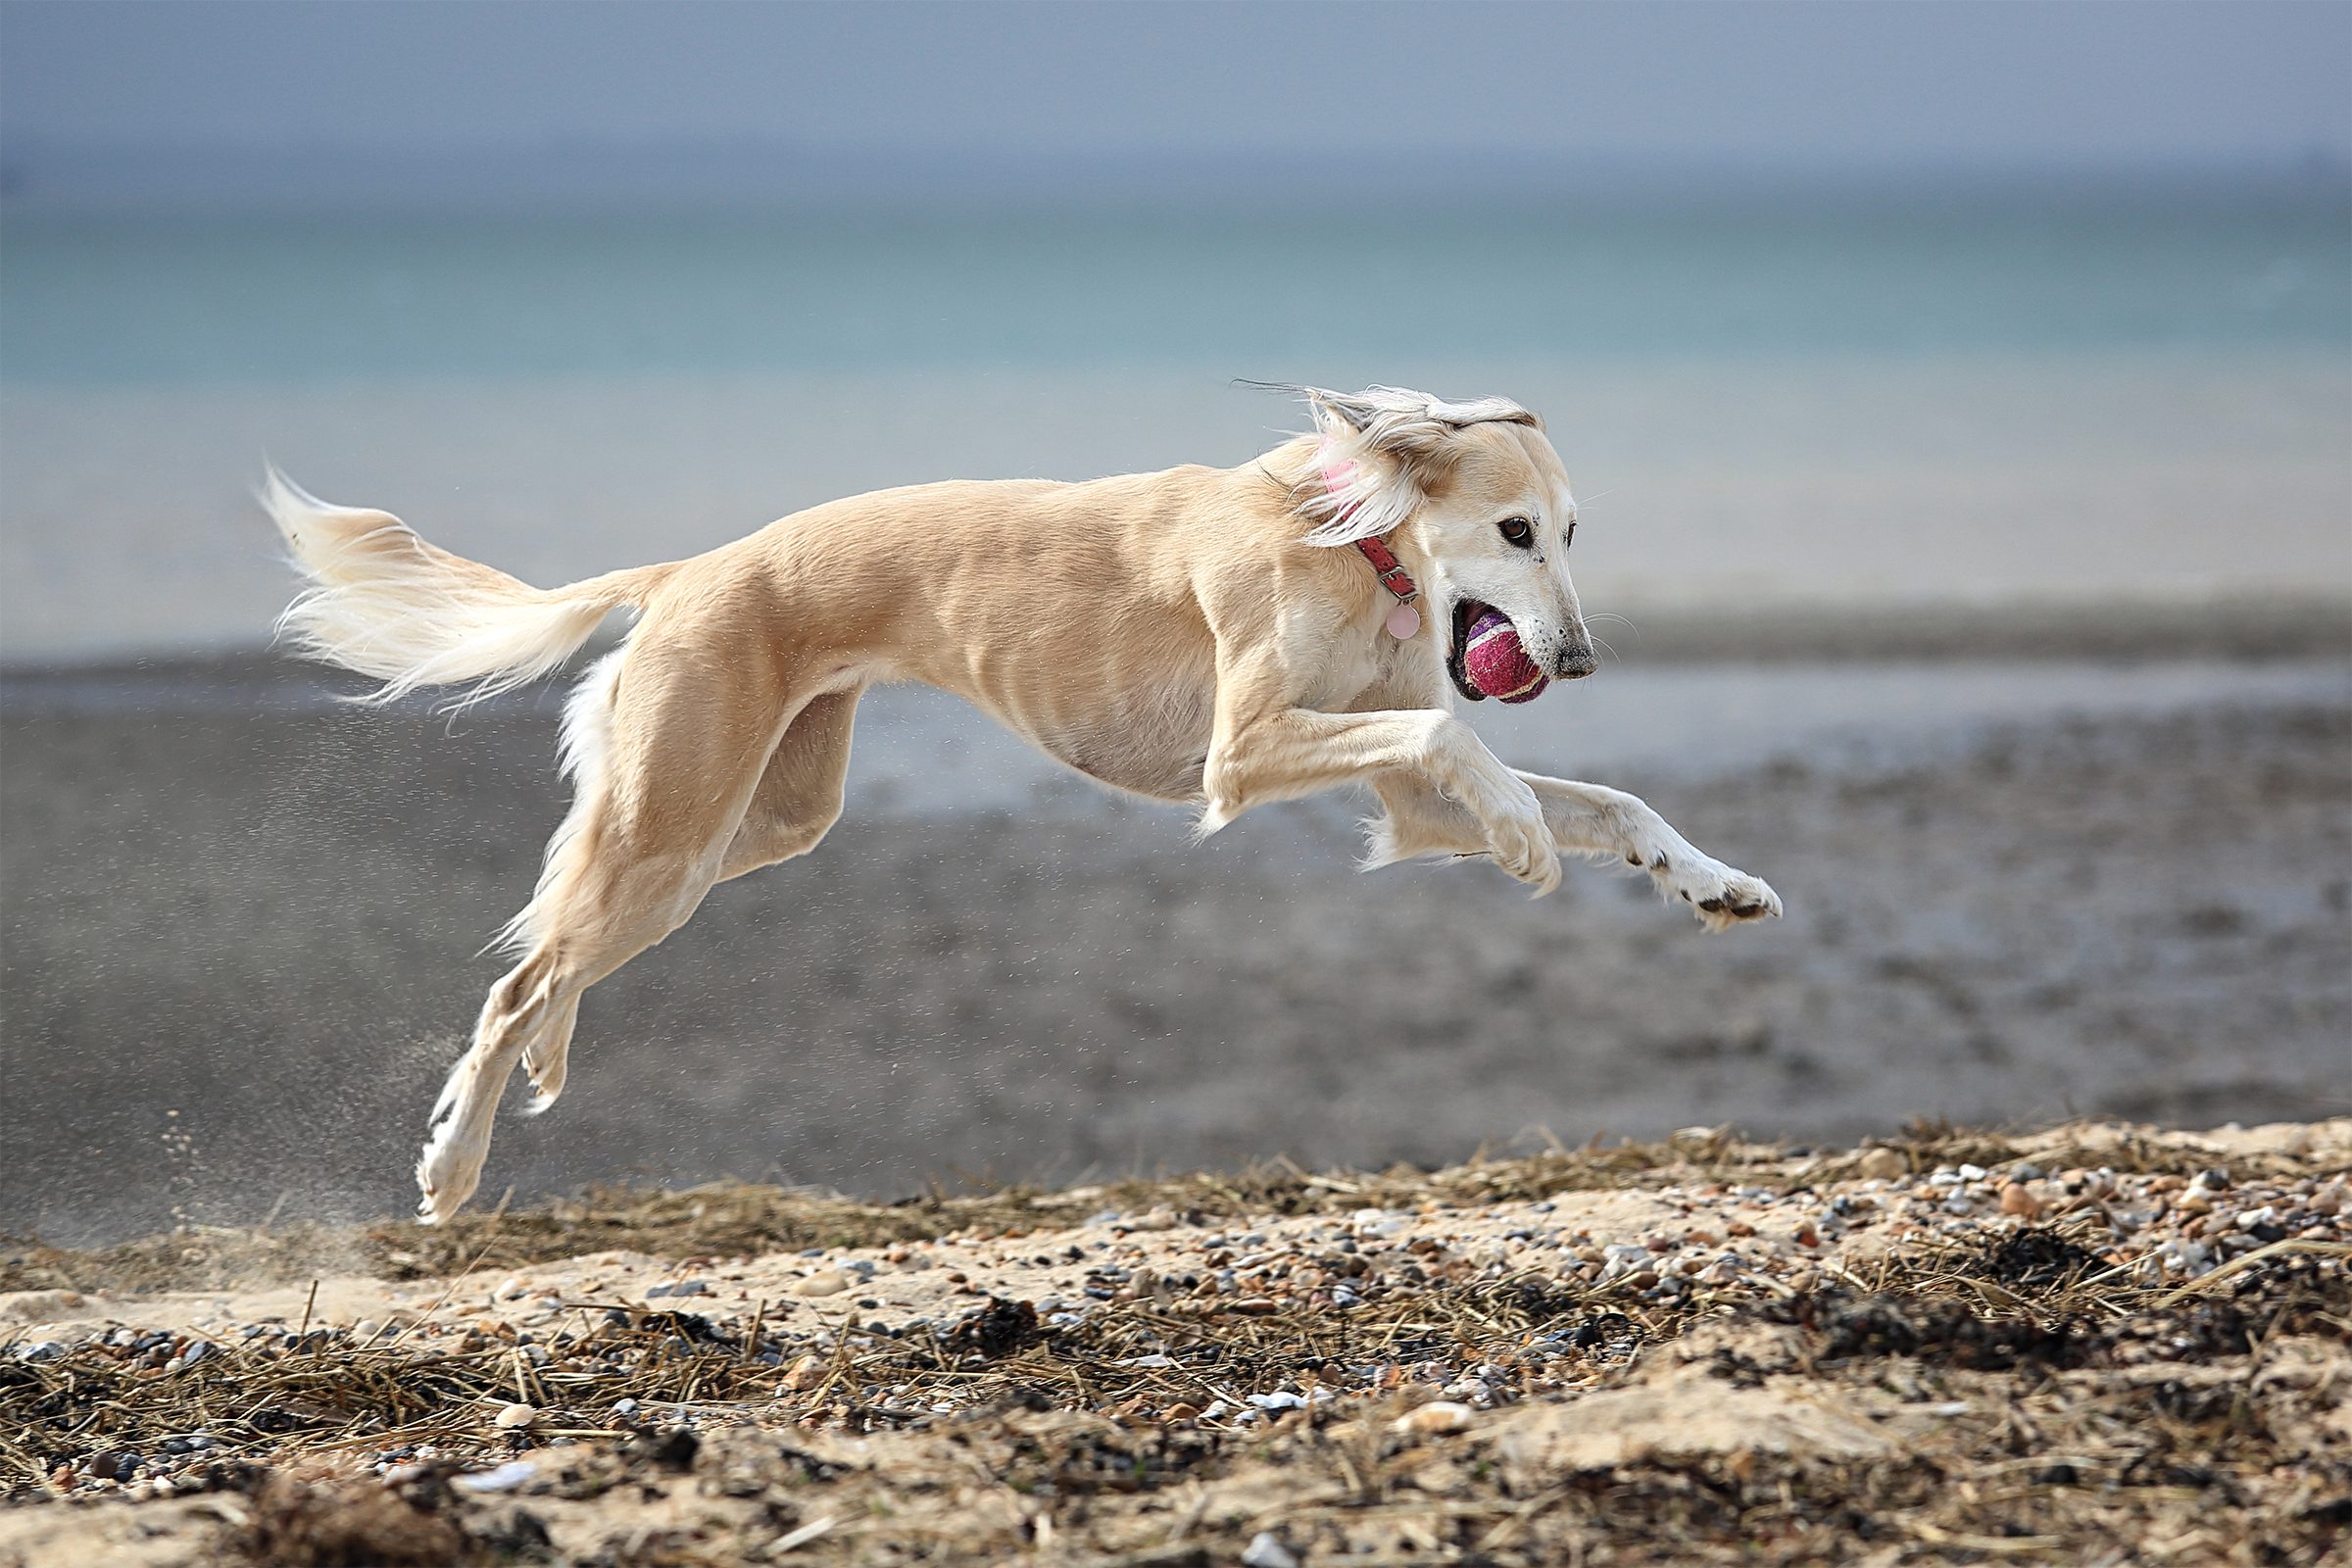 A white Saluki dog [Persian greyhound] running on the beach with a tennis ball in it's mouth